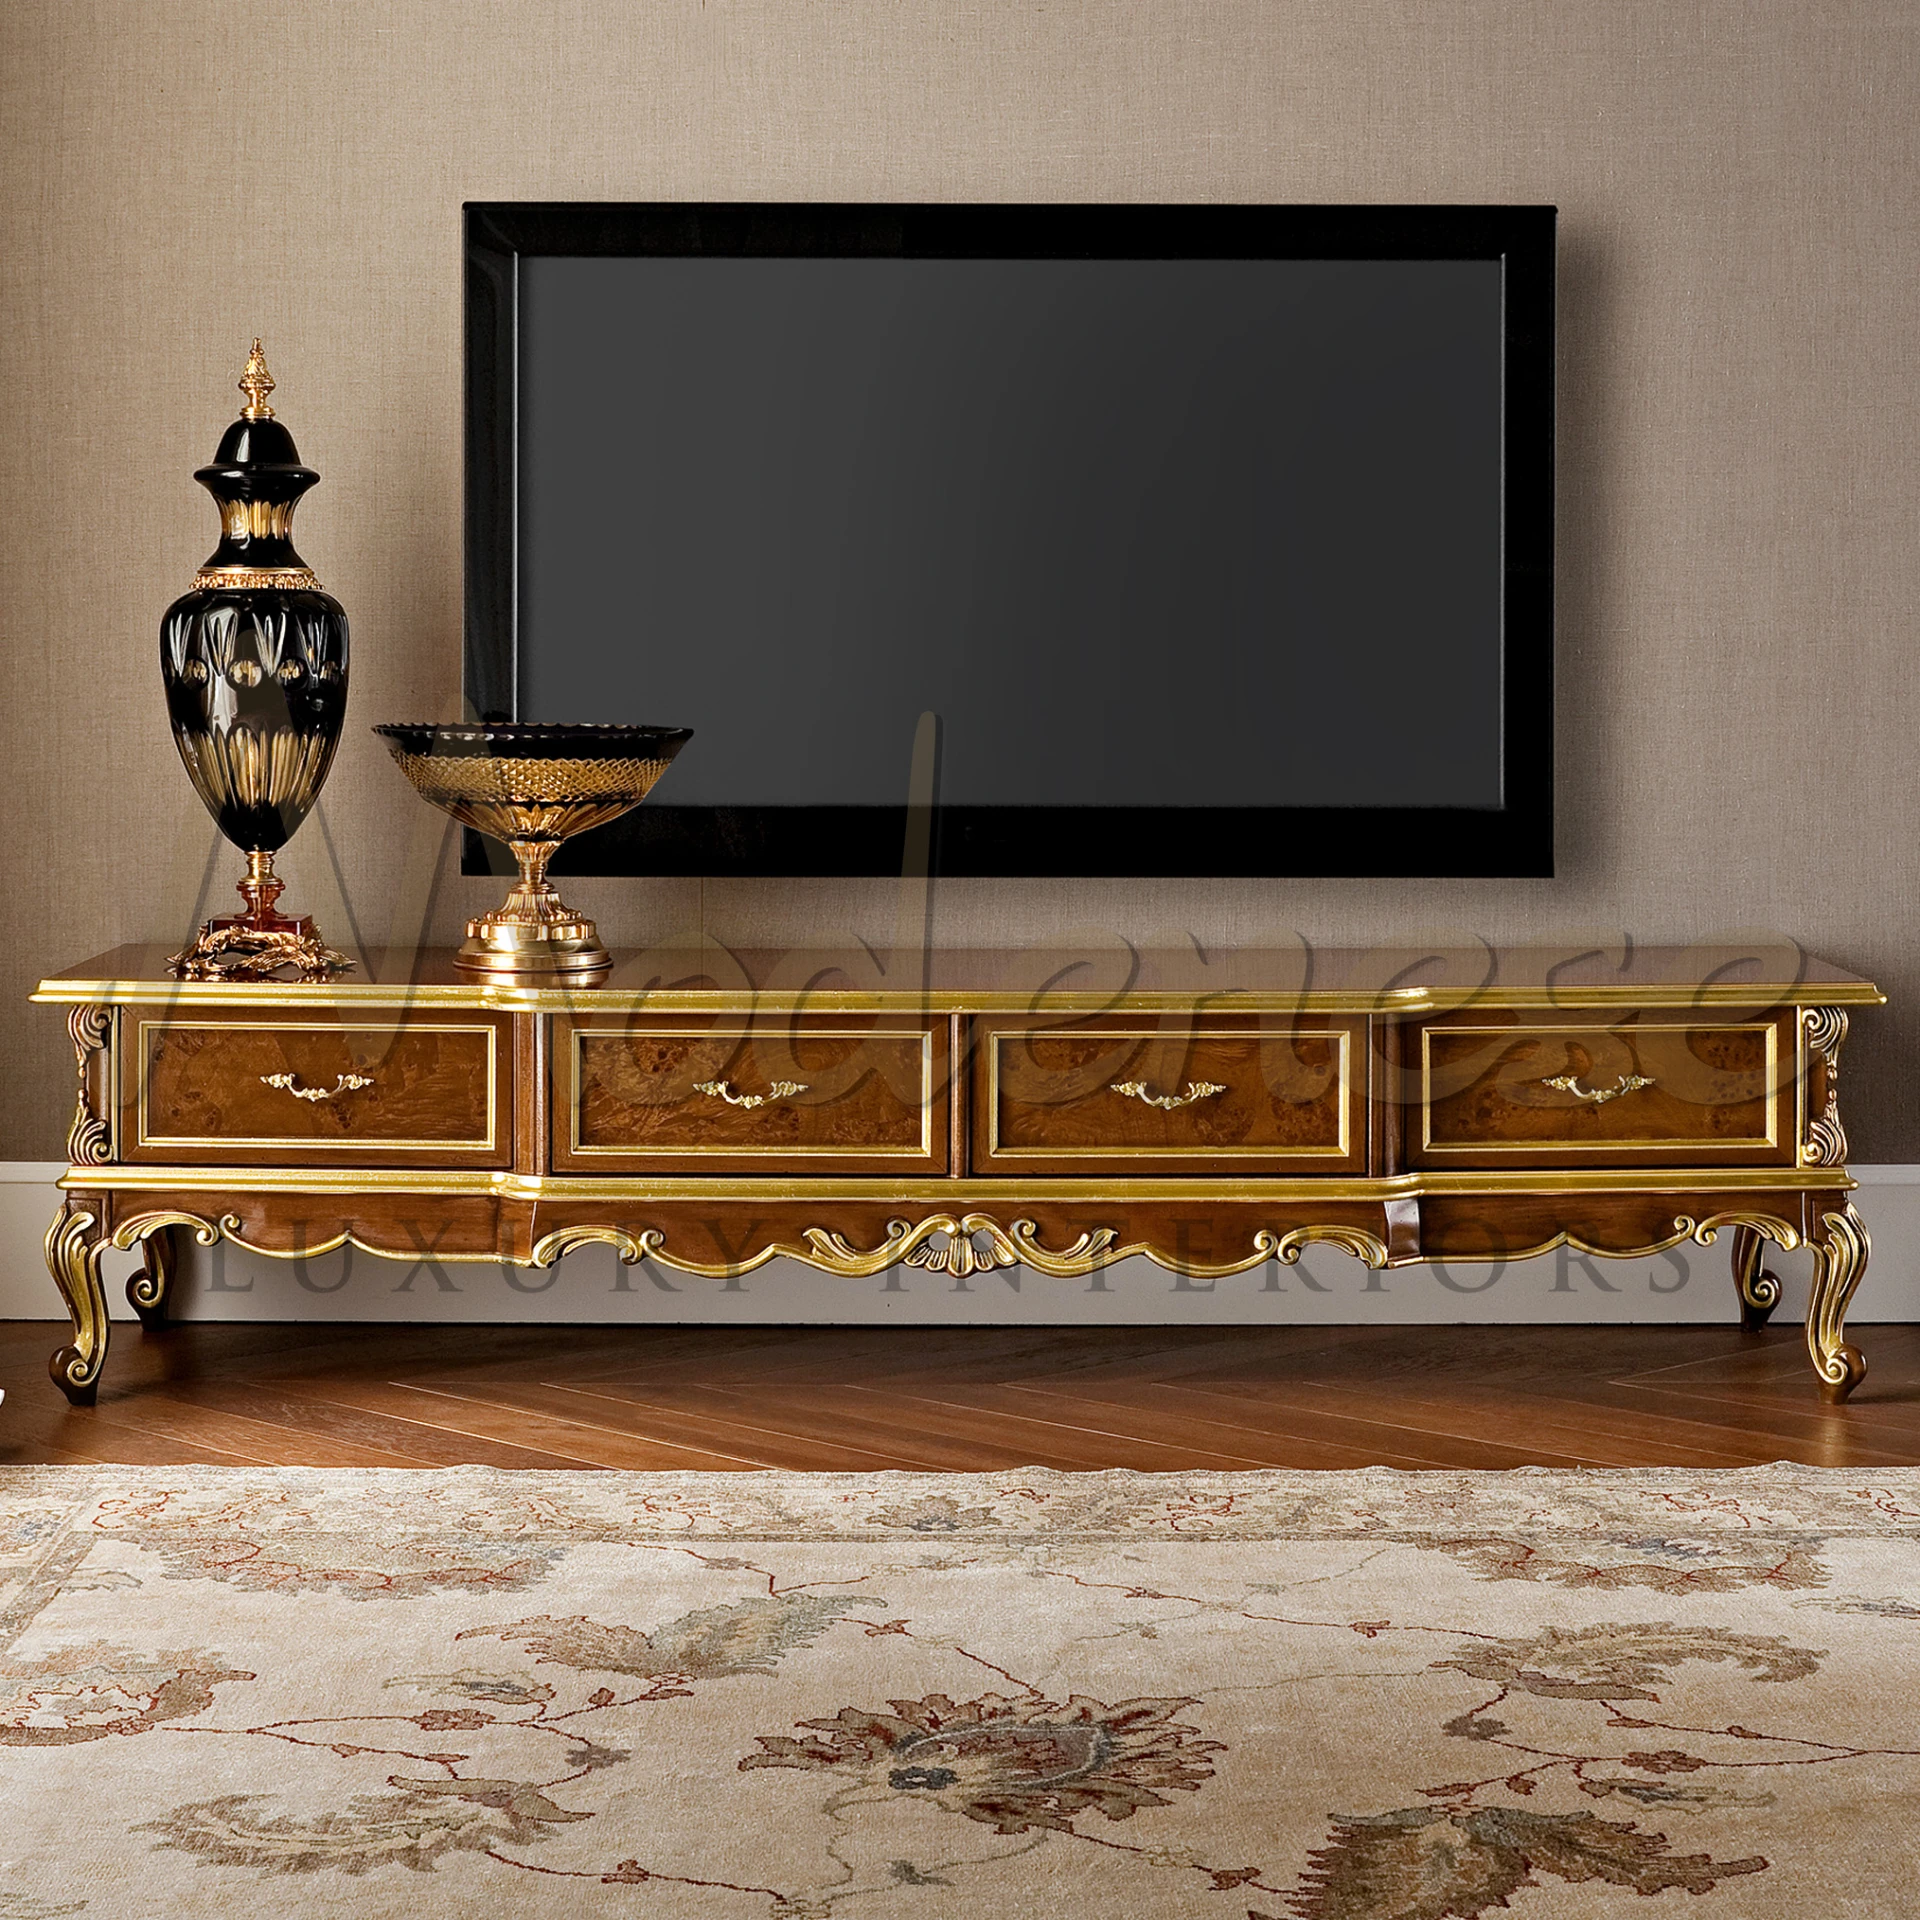 Elegant solid wood TV cabinet with 4 drawers, gold leaf inlays, and internal shelves, embodying luxury interior design.